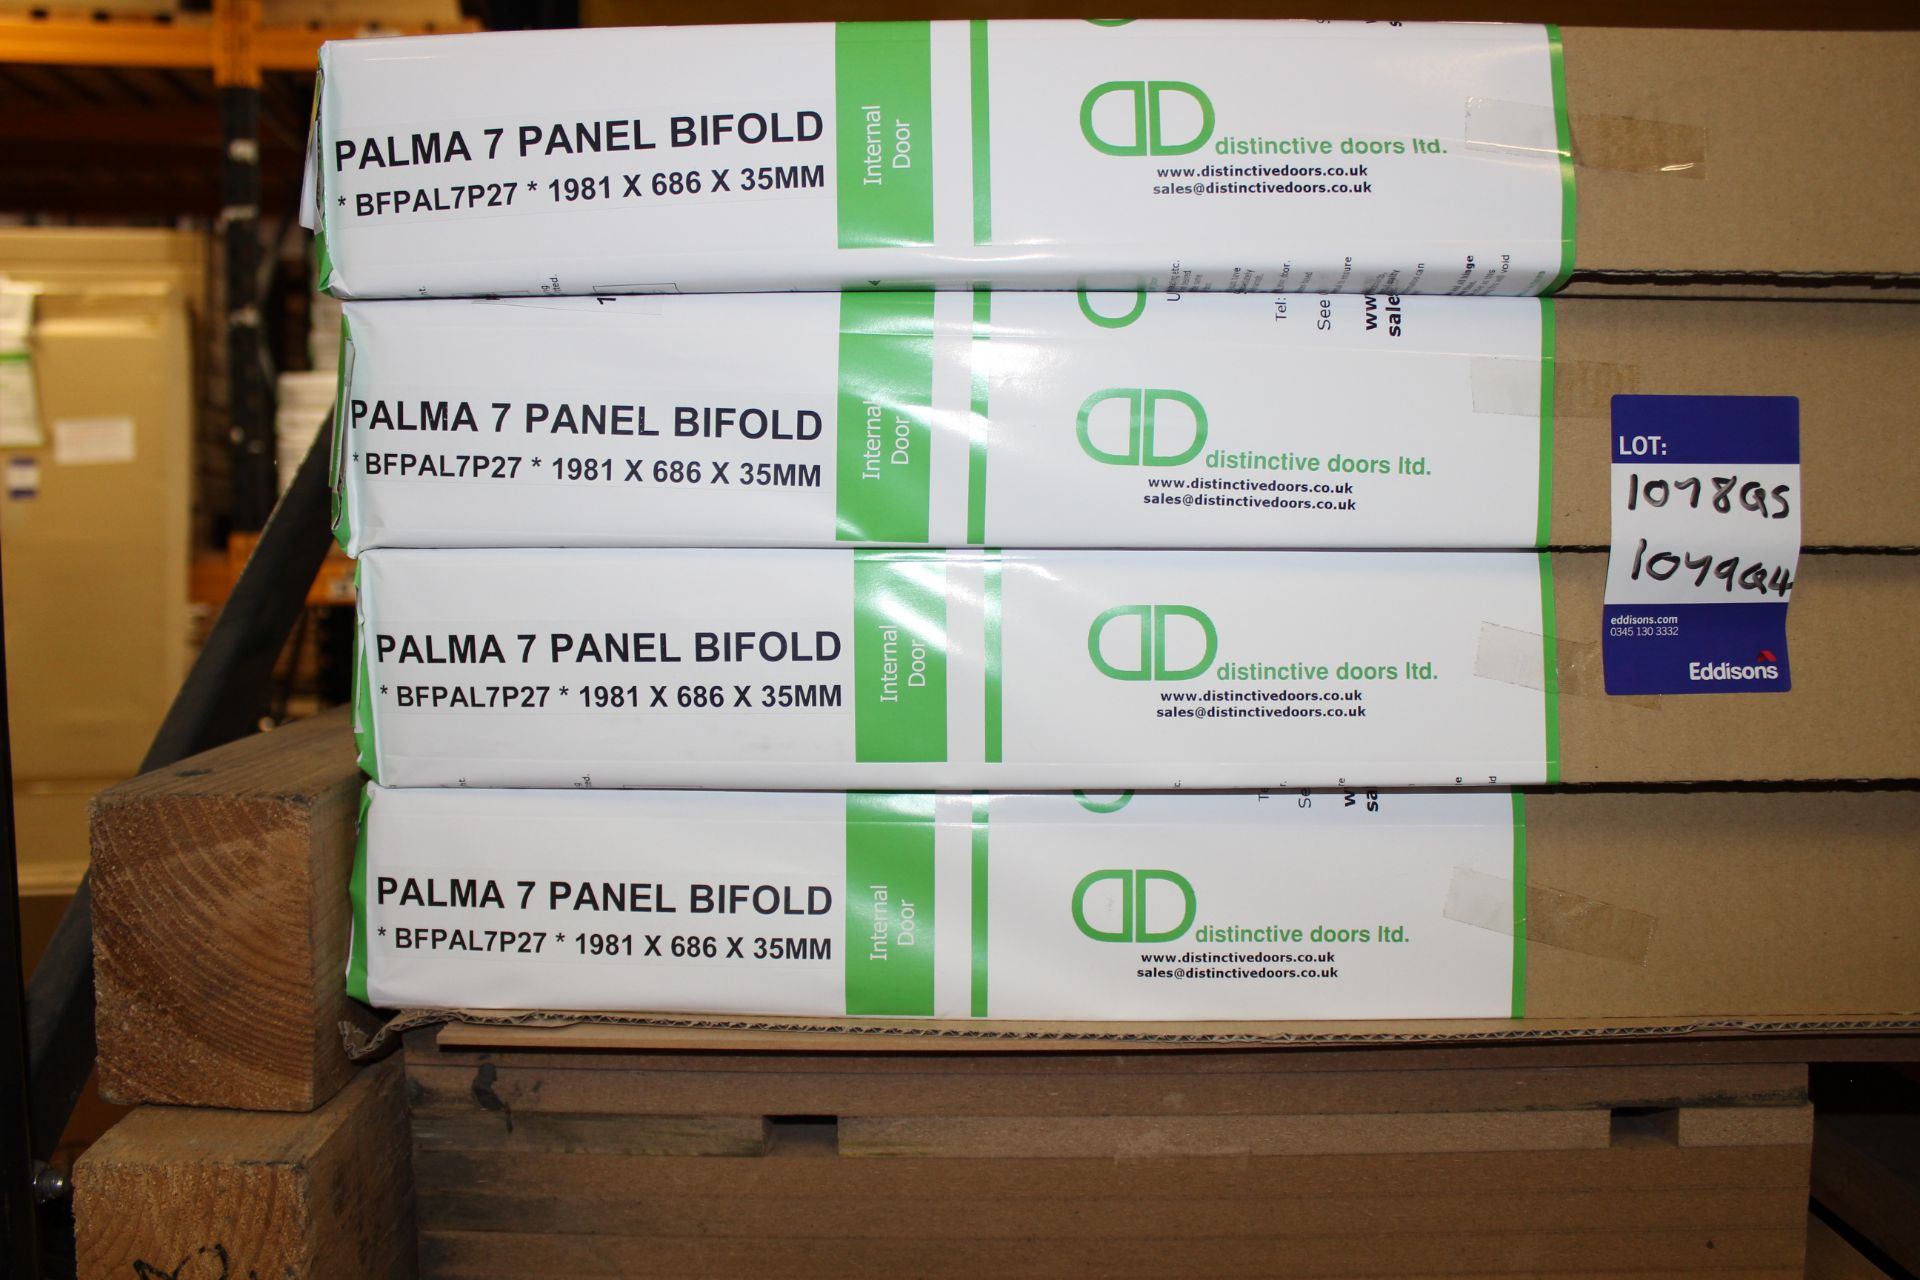 5 x Palma 7 Panel Bi Fold BFPAL7P27 1981x686x35mm Internal Door - Lots to be handed out in order - Image 2 of 3